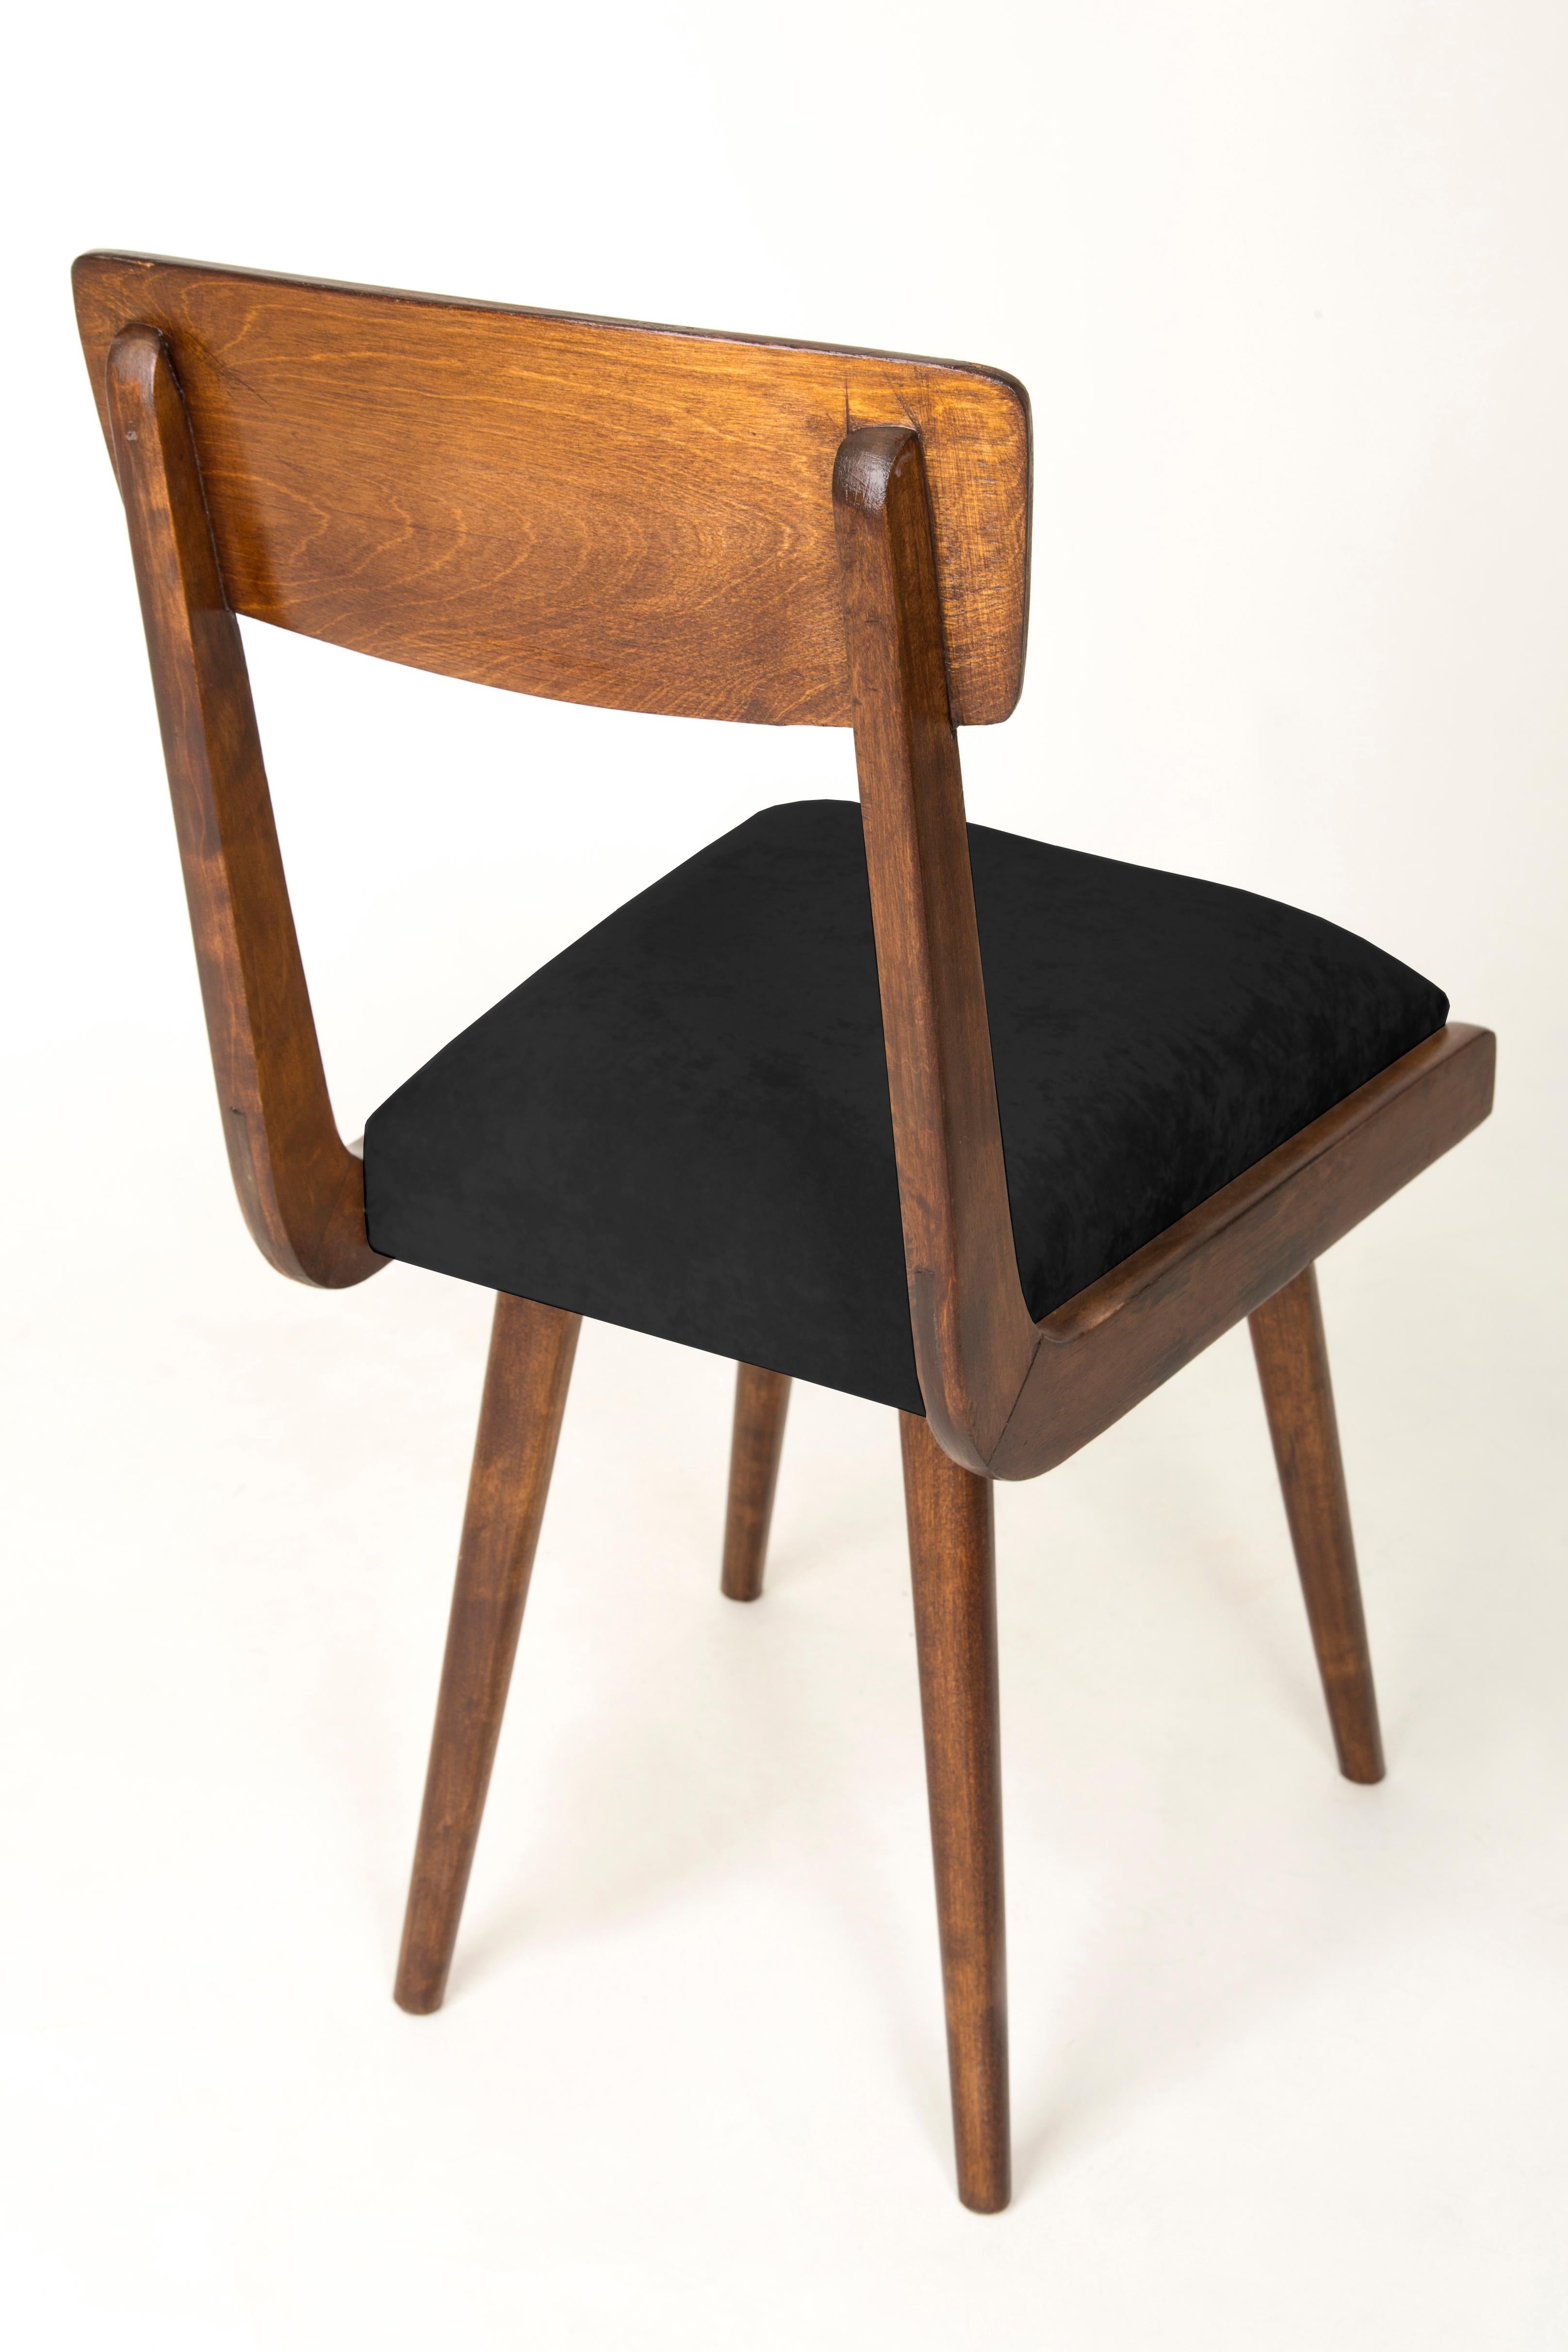 Hand-Crafted Set of Four 20th Century Black Wood Chairs, 1960s For Sale